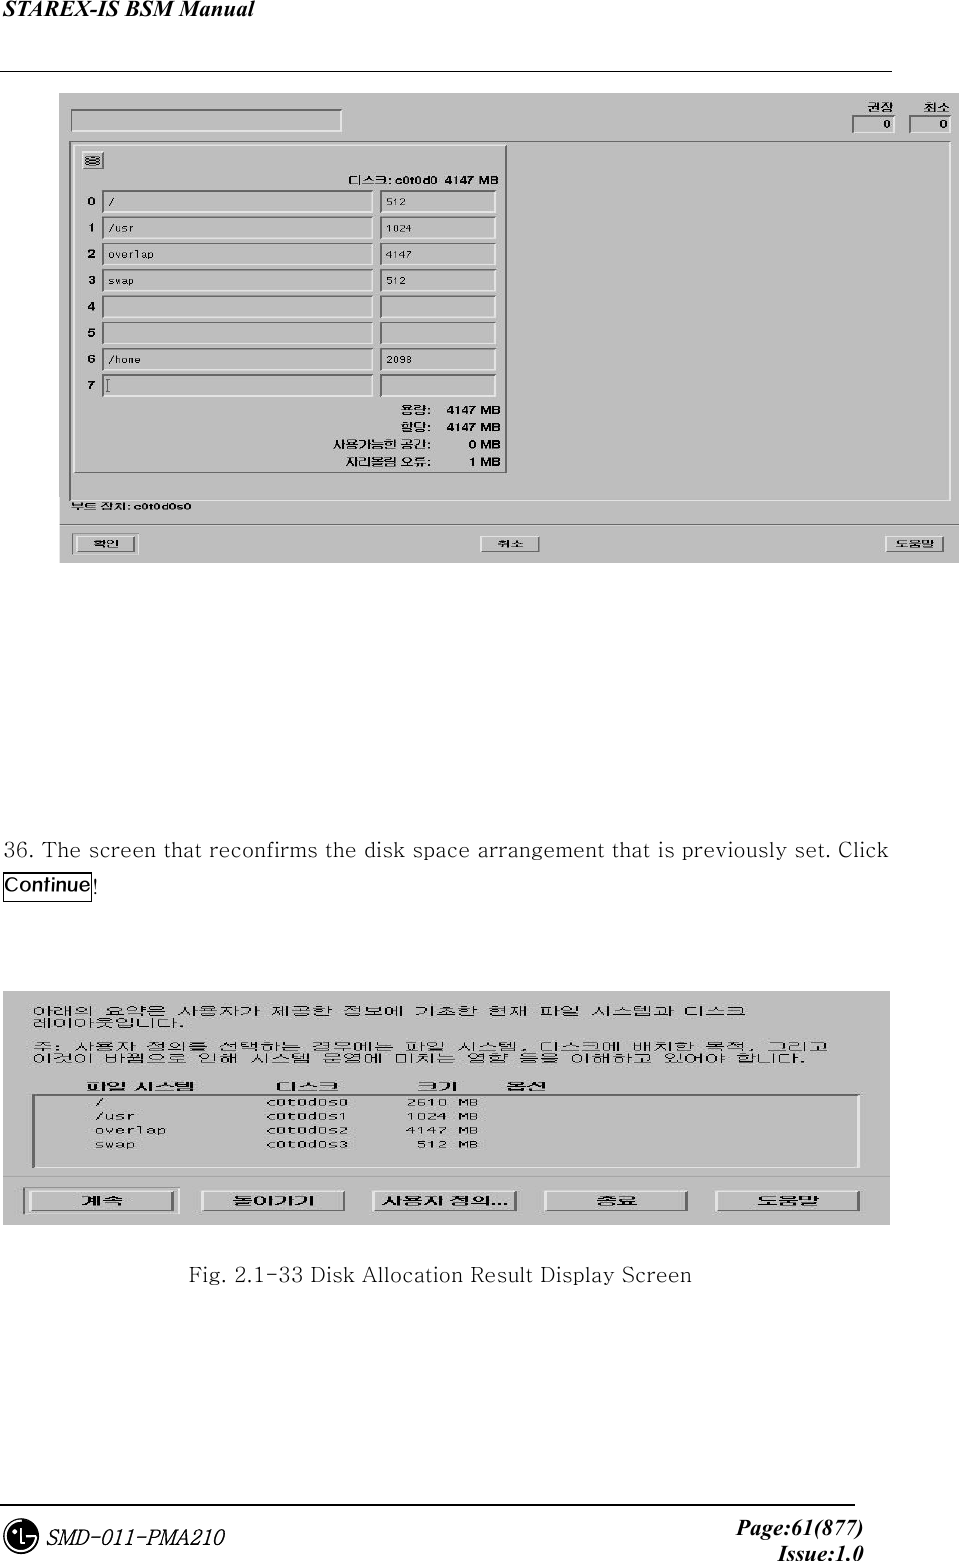 STAREX-IS BSM Manual     Page:61(877)Issue:1.0SMD-011-PMA210               36. The screen that reconfirms the disk space arrangement that is previously set. Click Continue!   Fig. 2.1-33 Disk Allocation Result Display Screen    